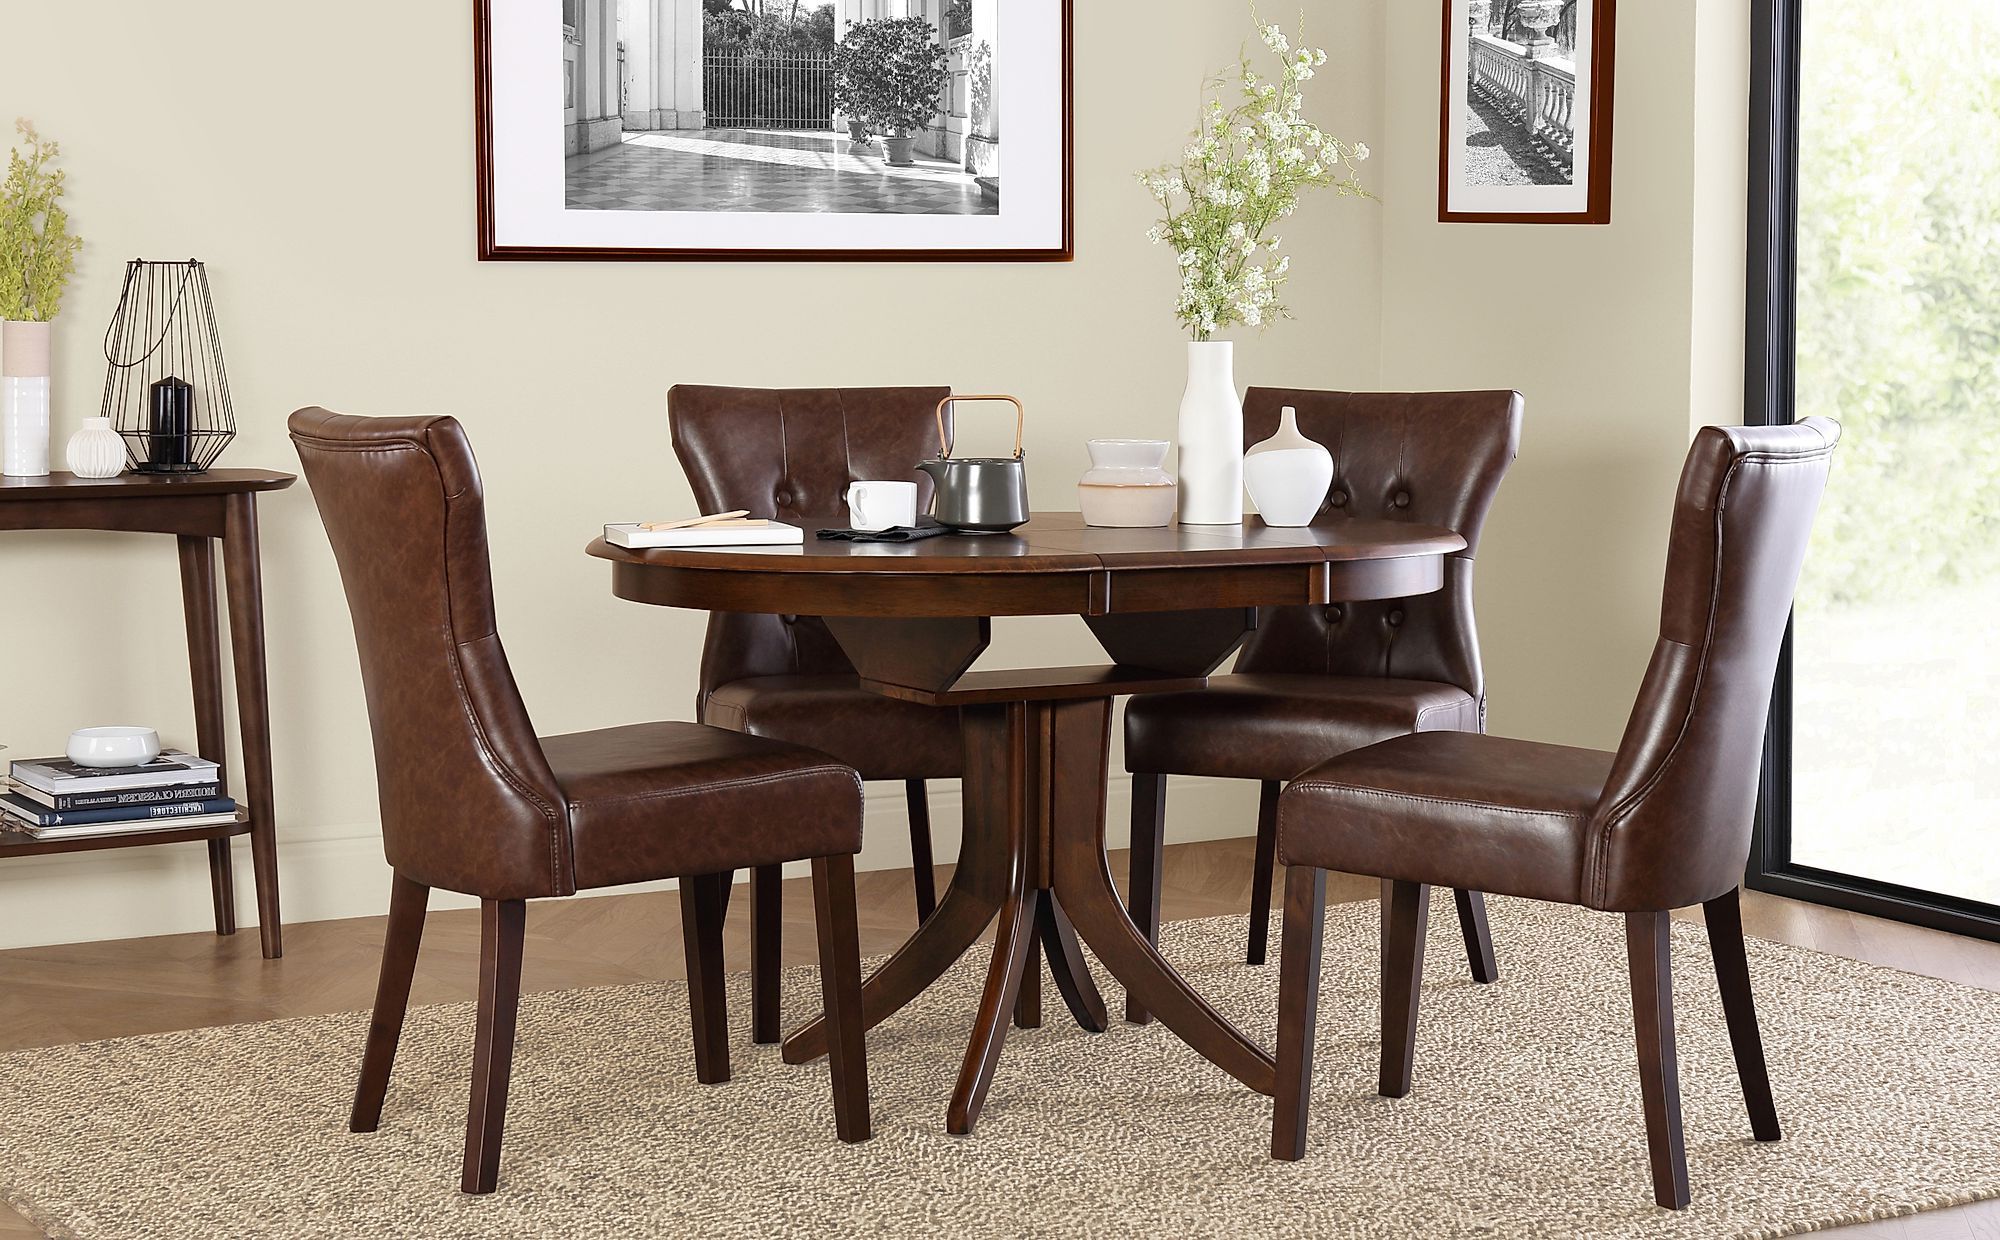 Hudson Round Dark Wood Extending Dining Table With 6 With 2019 Brown Dining Tables (View 9 of 15)